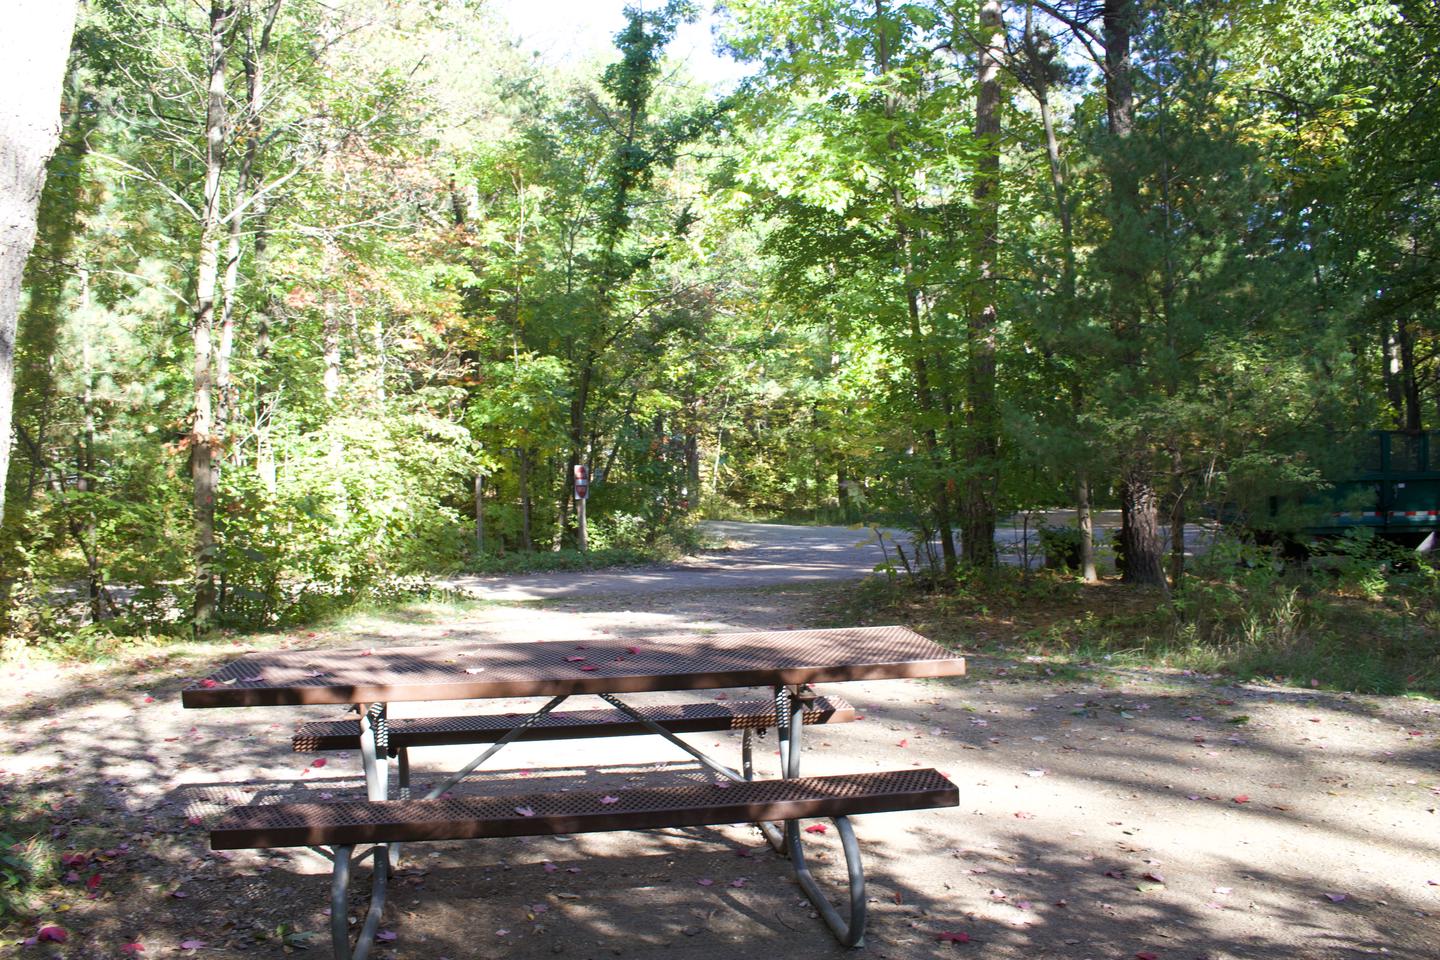 Campsite #81, view from the site toward the road